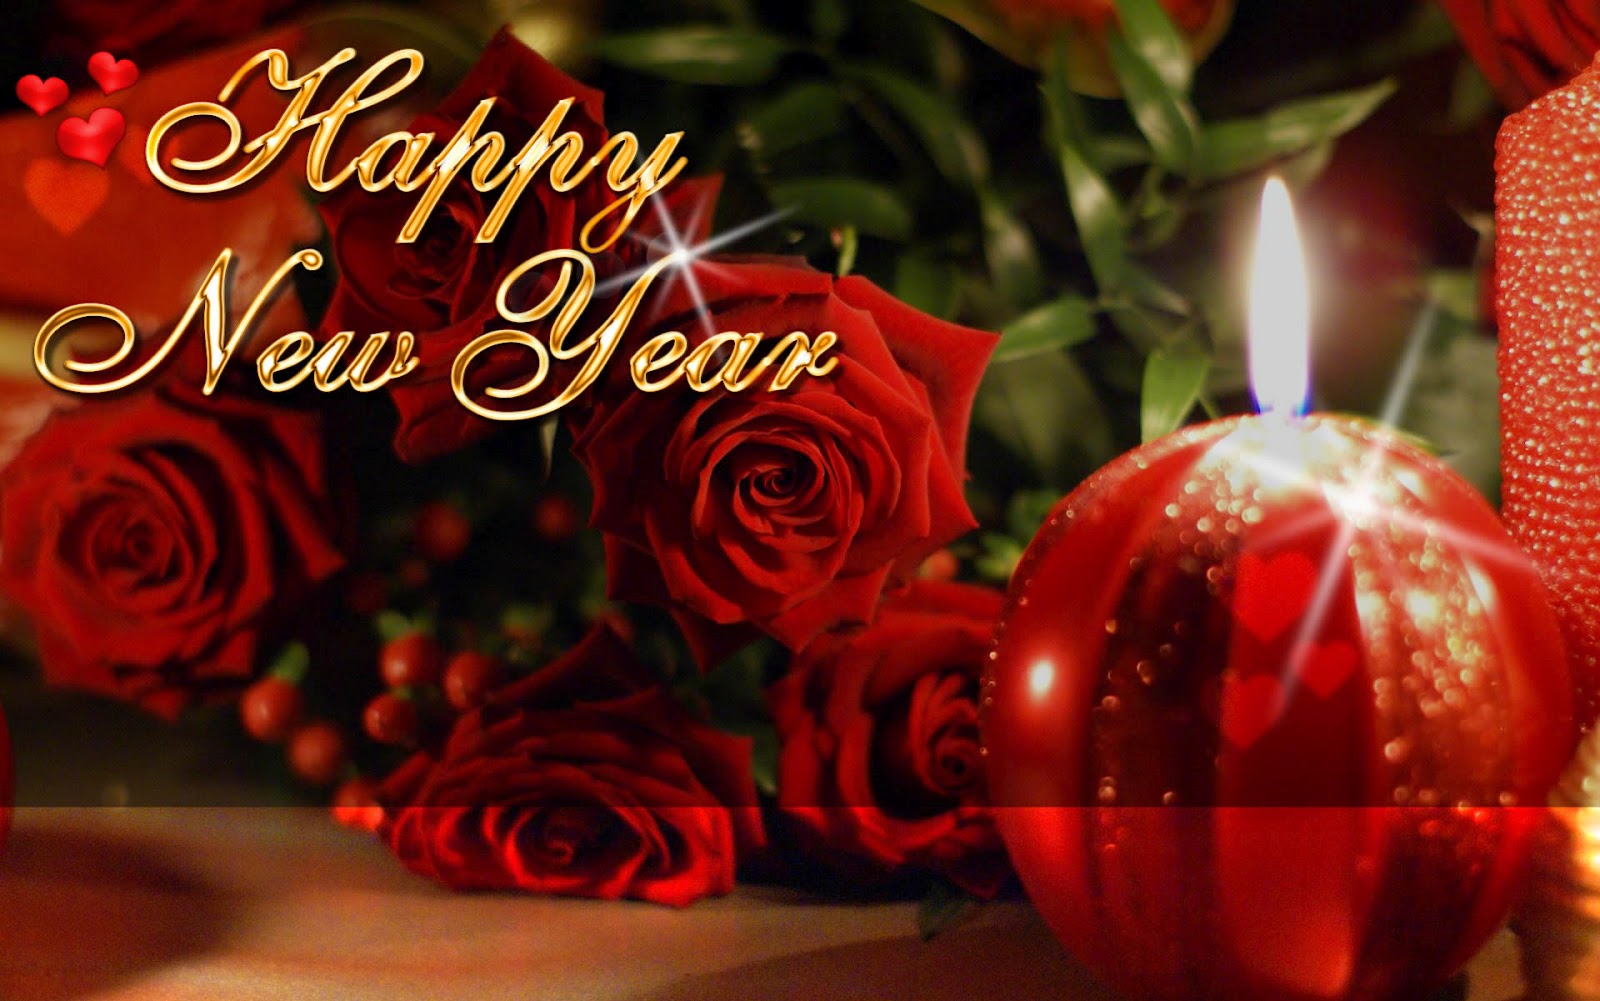 Happy New Year 2016 3D Wallpapers Download Free - Welcome Happy ...